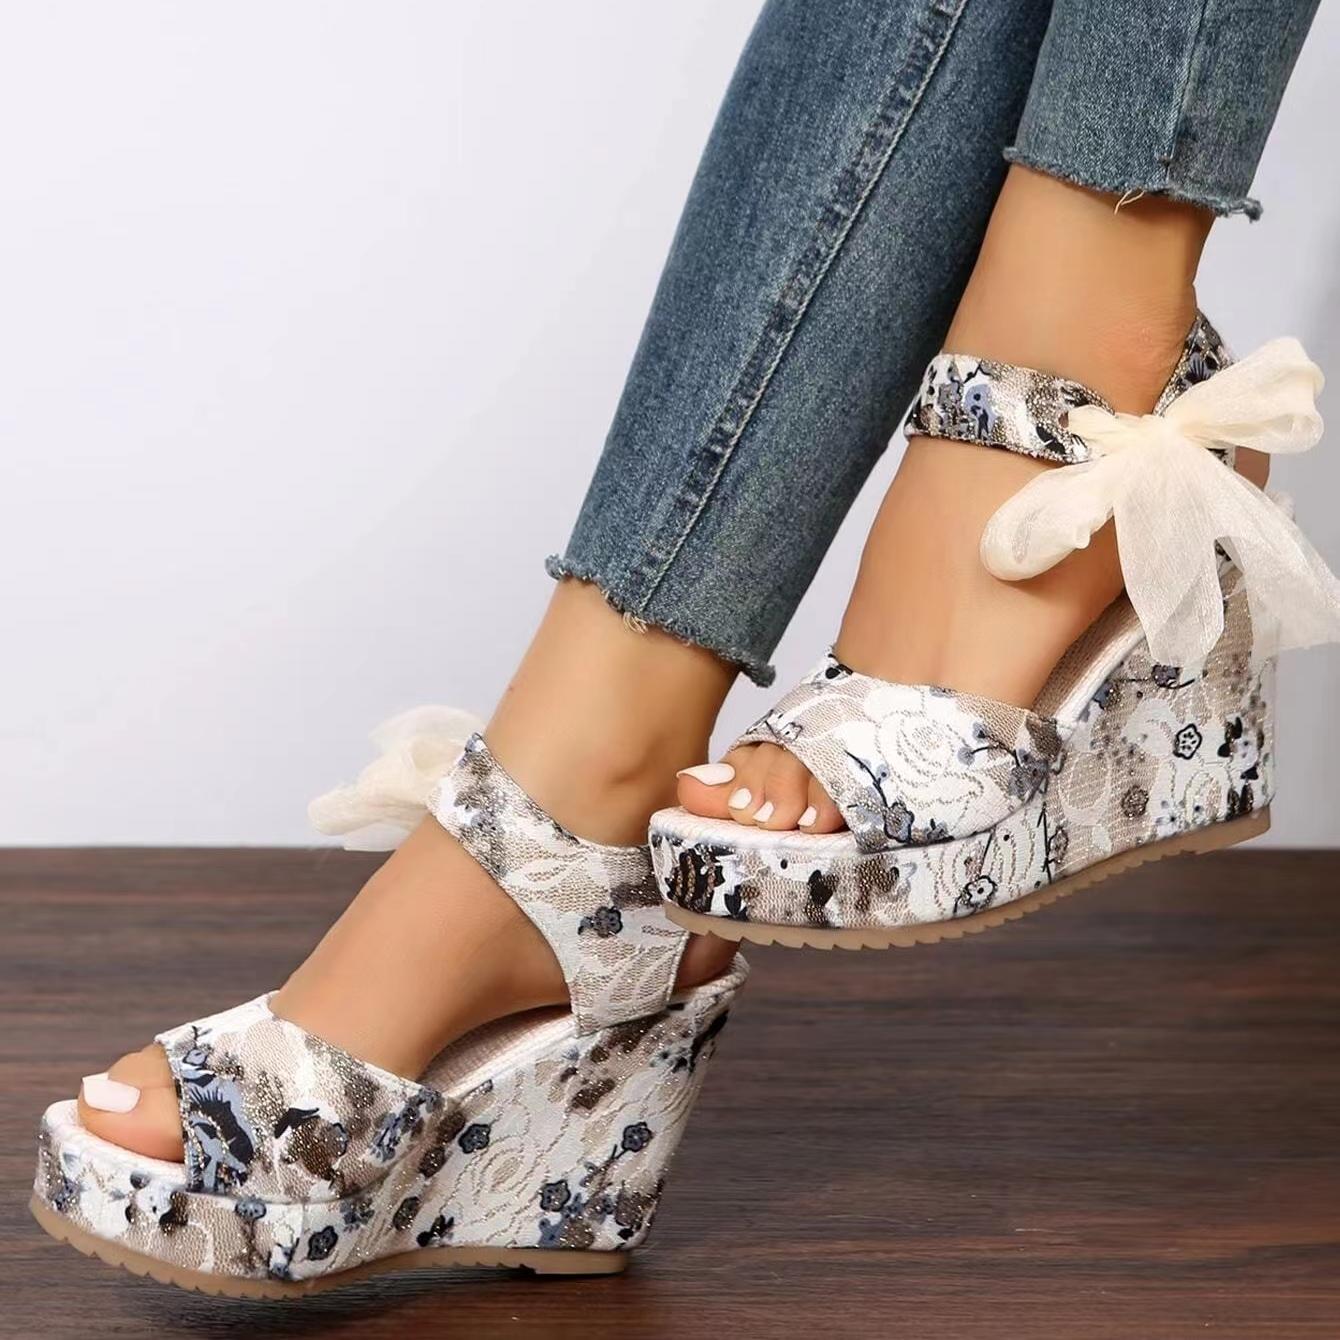  Platform Wedges Sandals for Women, BLShaoJ Women's Fashion  Peep-Toe Tie-up Ankle Strap Floral Print Platform Wedge Sandals Open Toe  Summer Casual Work Party Shoes : Clothing, Shoes & Jewelry